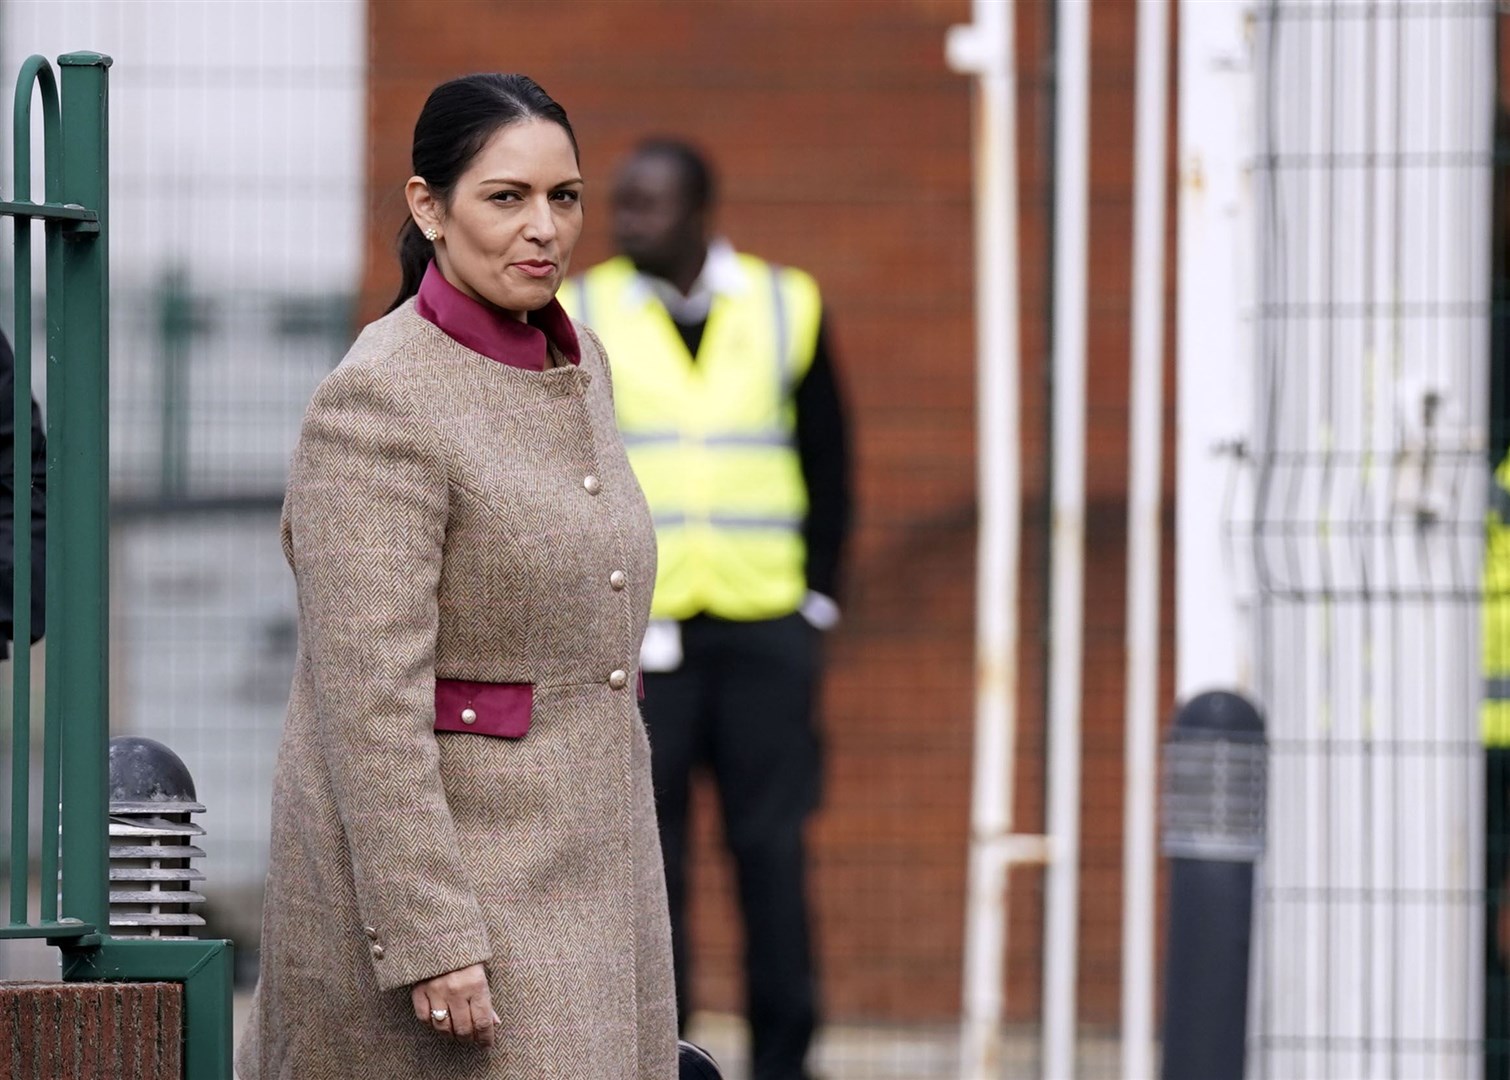 Priti Patel said MPs could be asked to share their whereabouts with police about all business-related visits (Steve Parsons/PA)